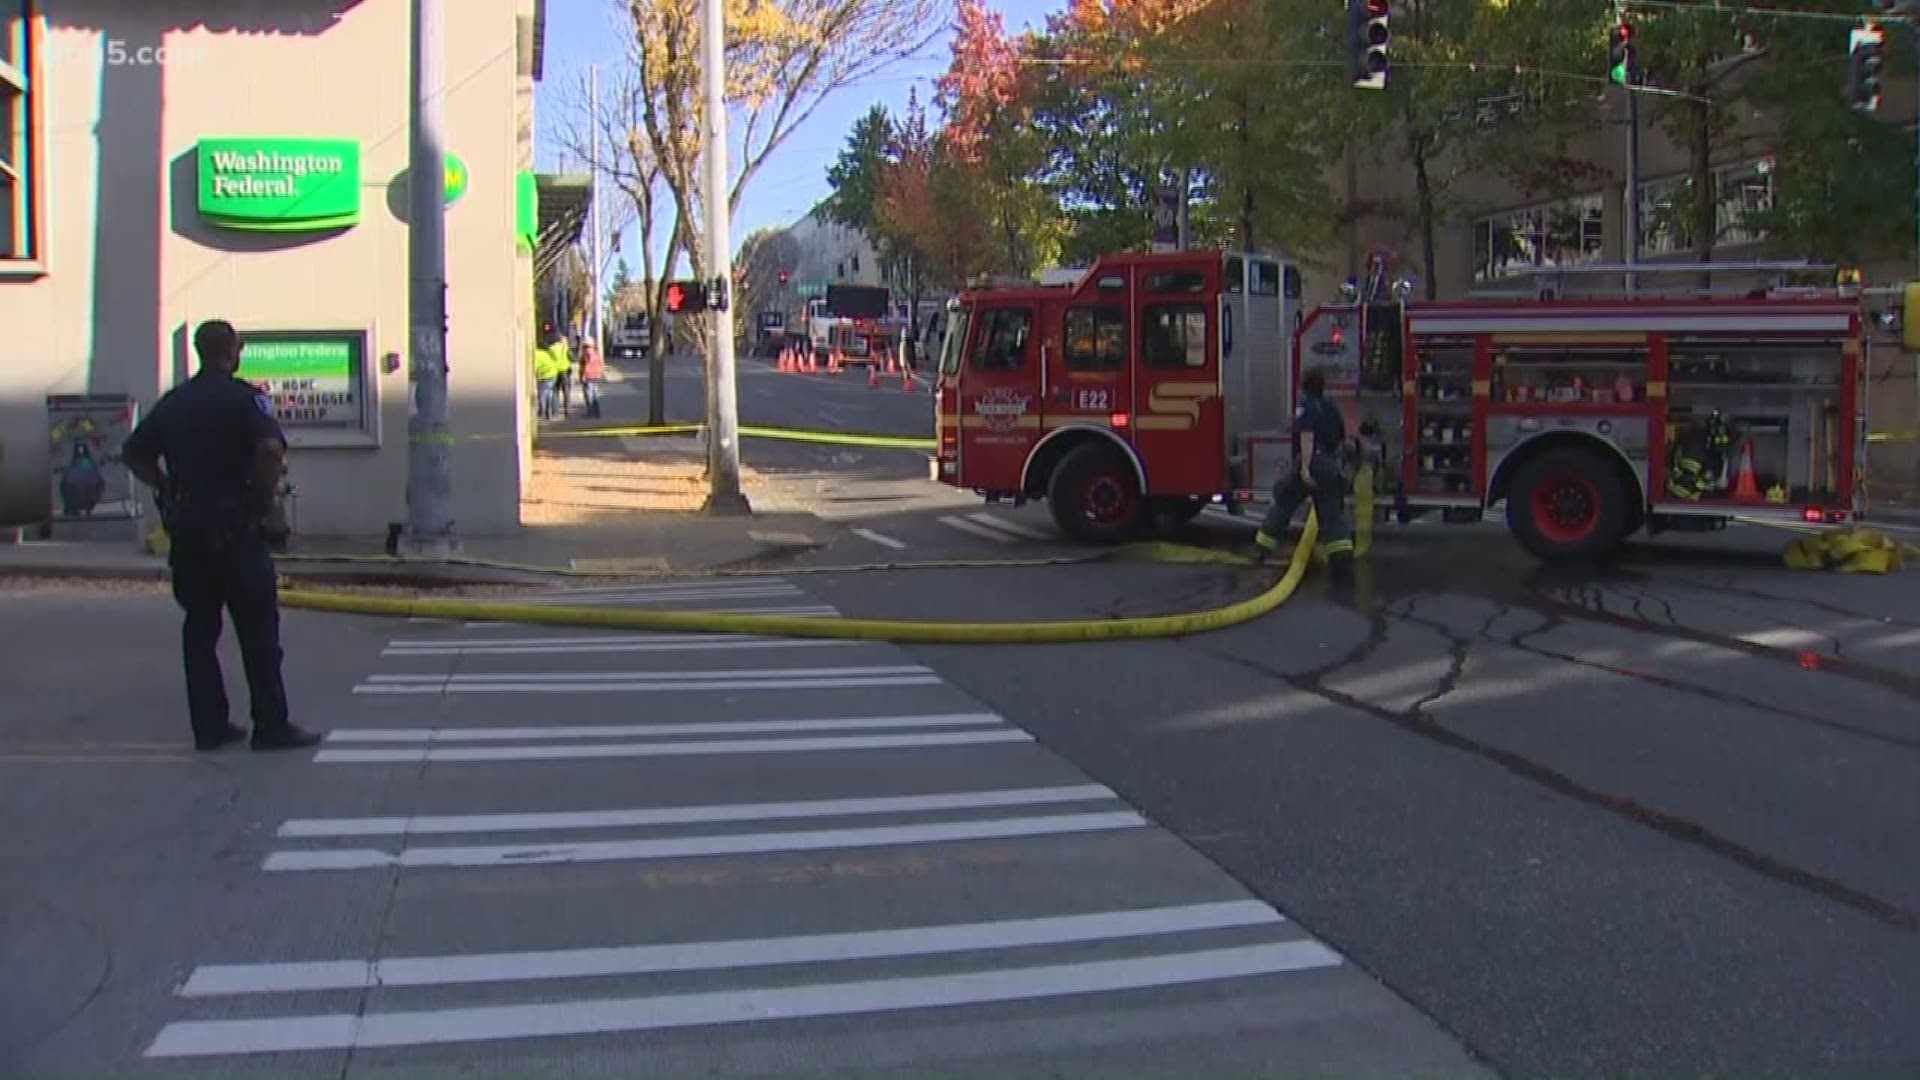 Seattle fire officials said the gas leak near Brooklyn Ave. NE and NE 45th Street was secured around 5:15 p.m. The leak caused evacuations in the surrounding area.